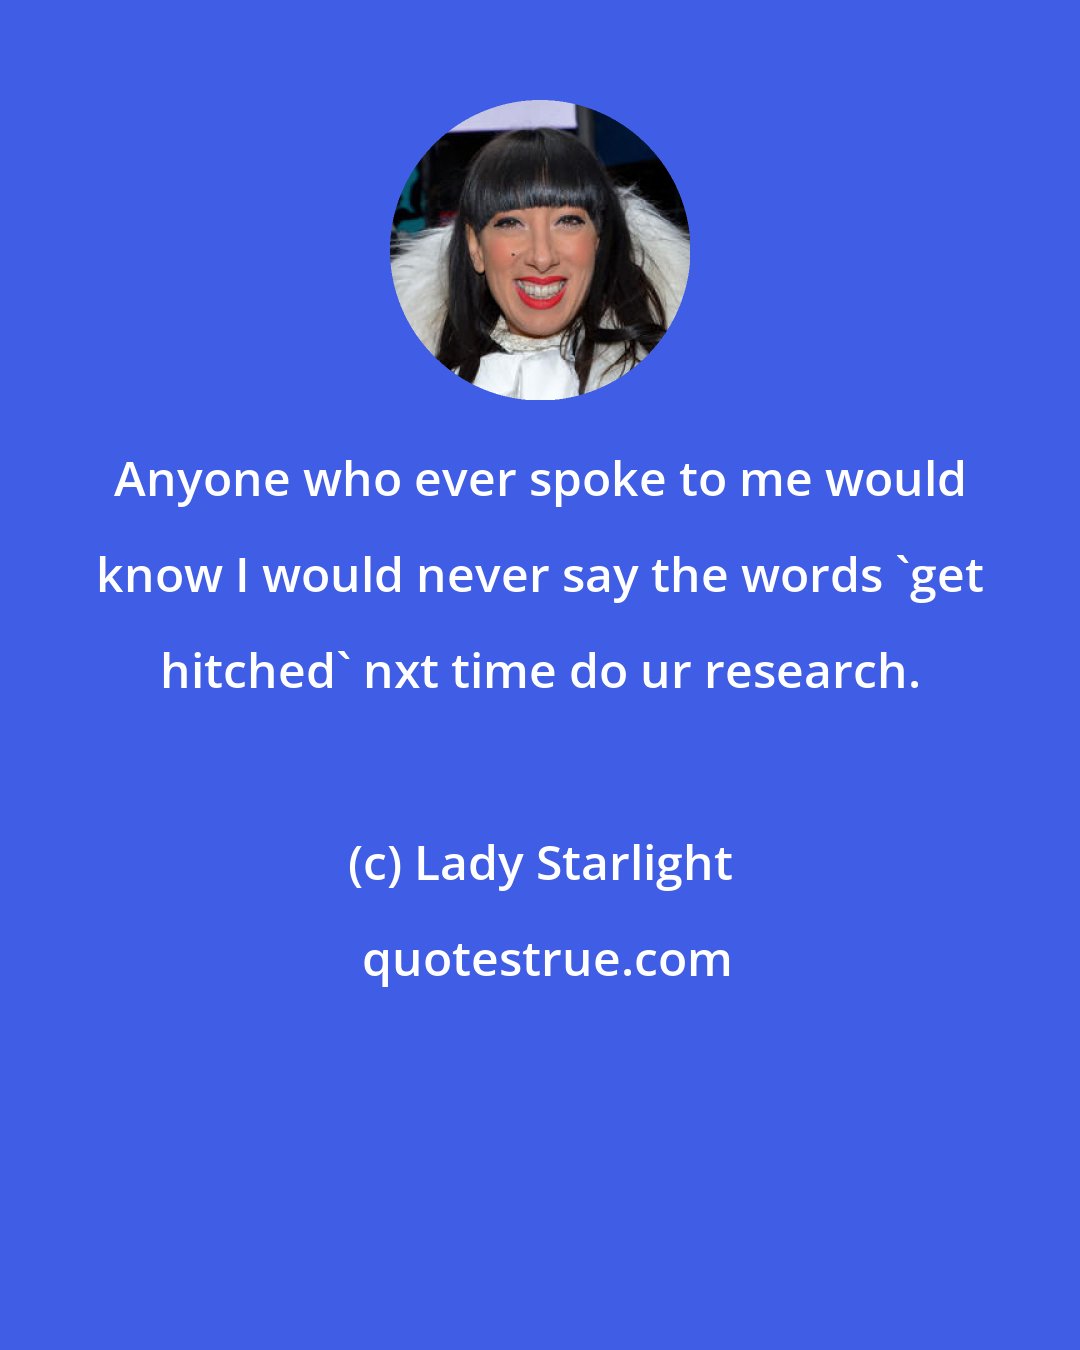 Lady Starlight: Anyone who ever spoke to me would know I would never say the words 'get hitched' nxt time do ur research.